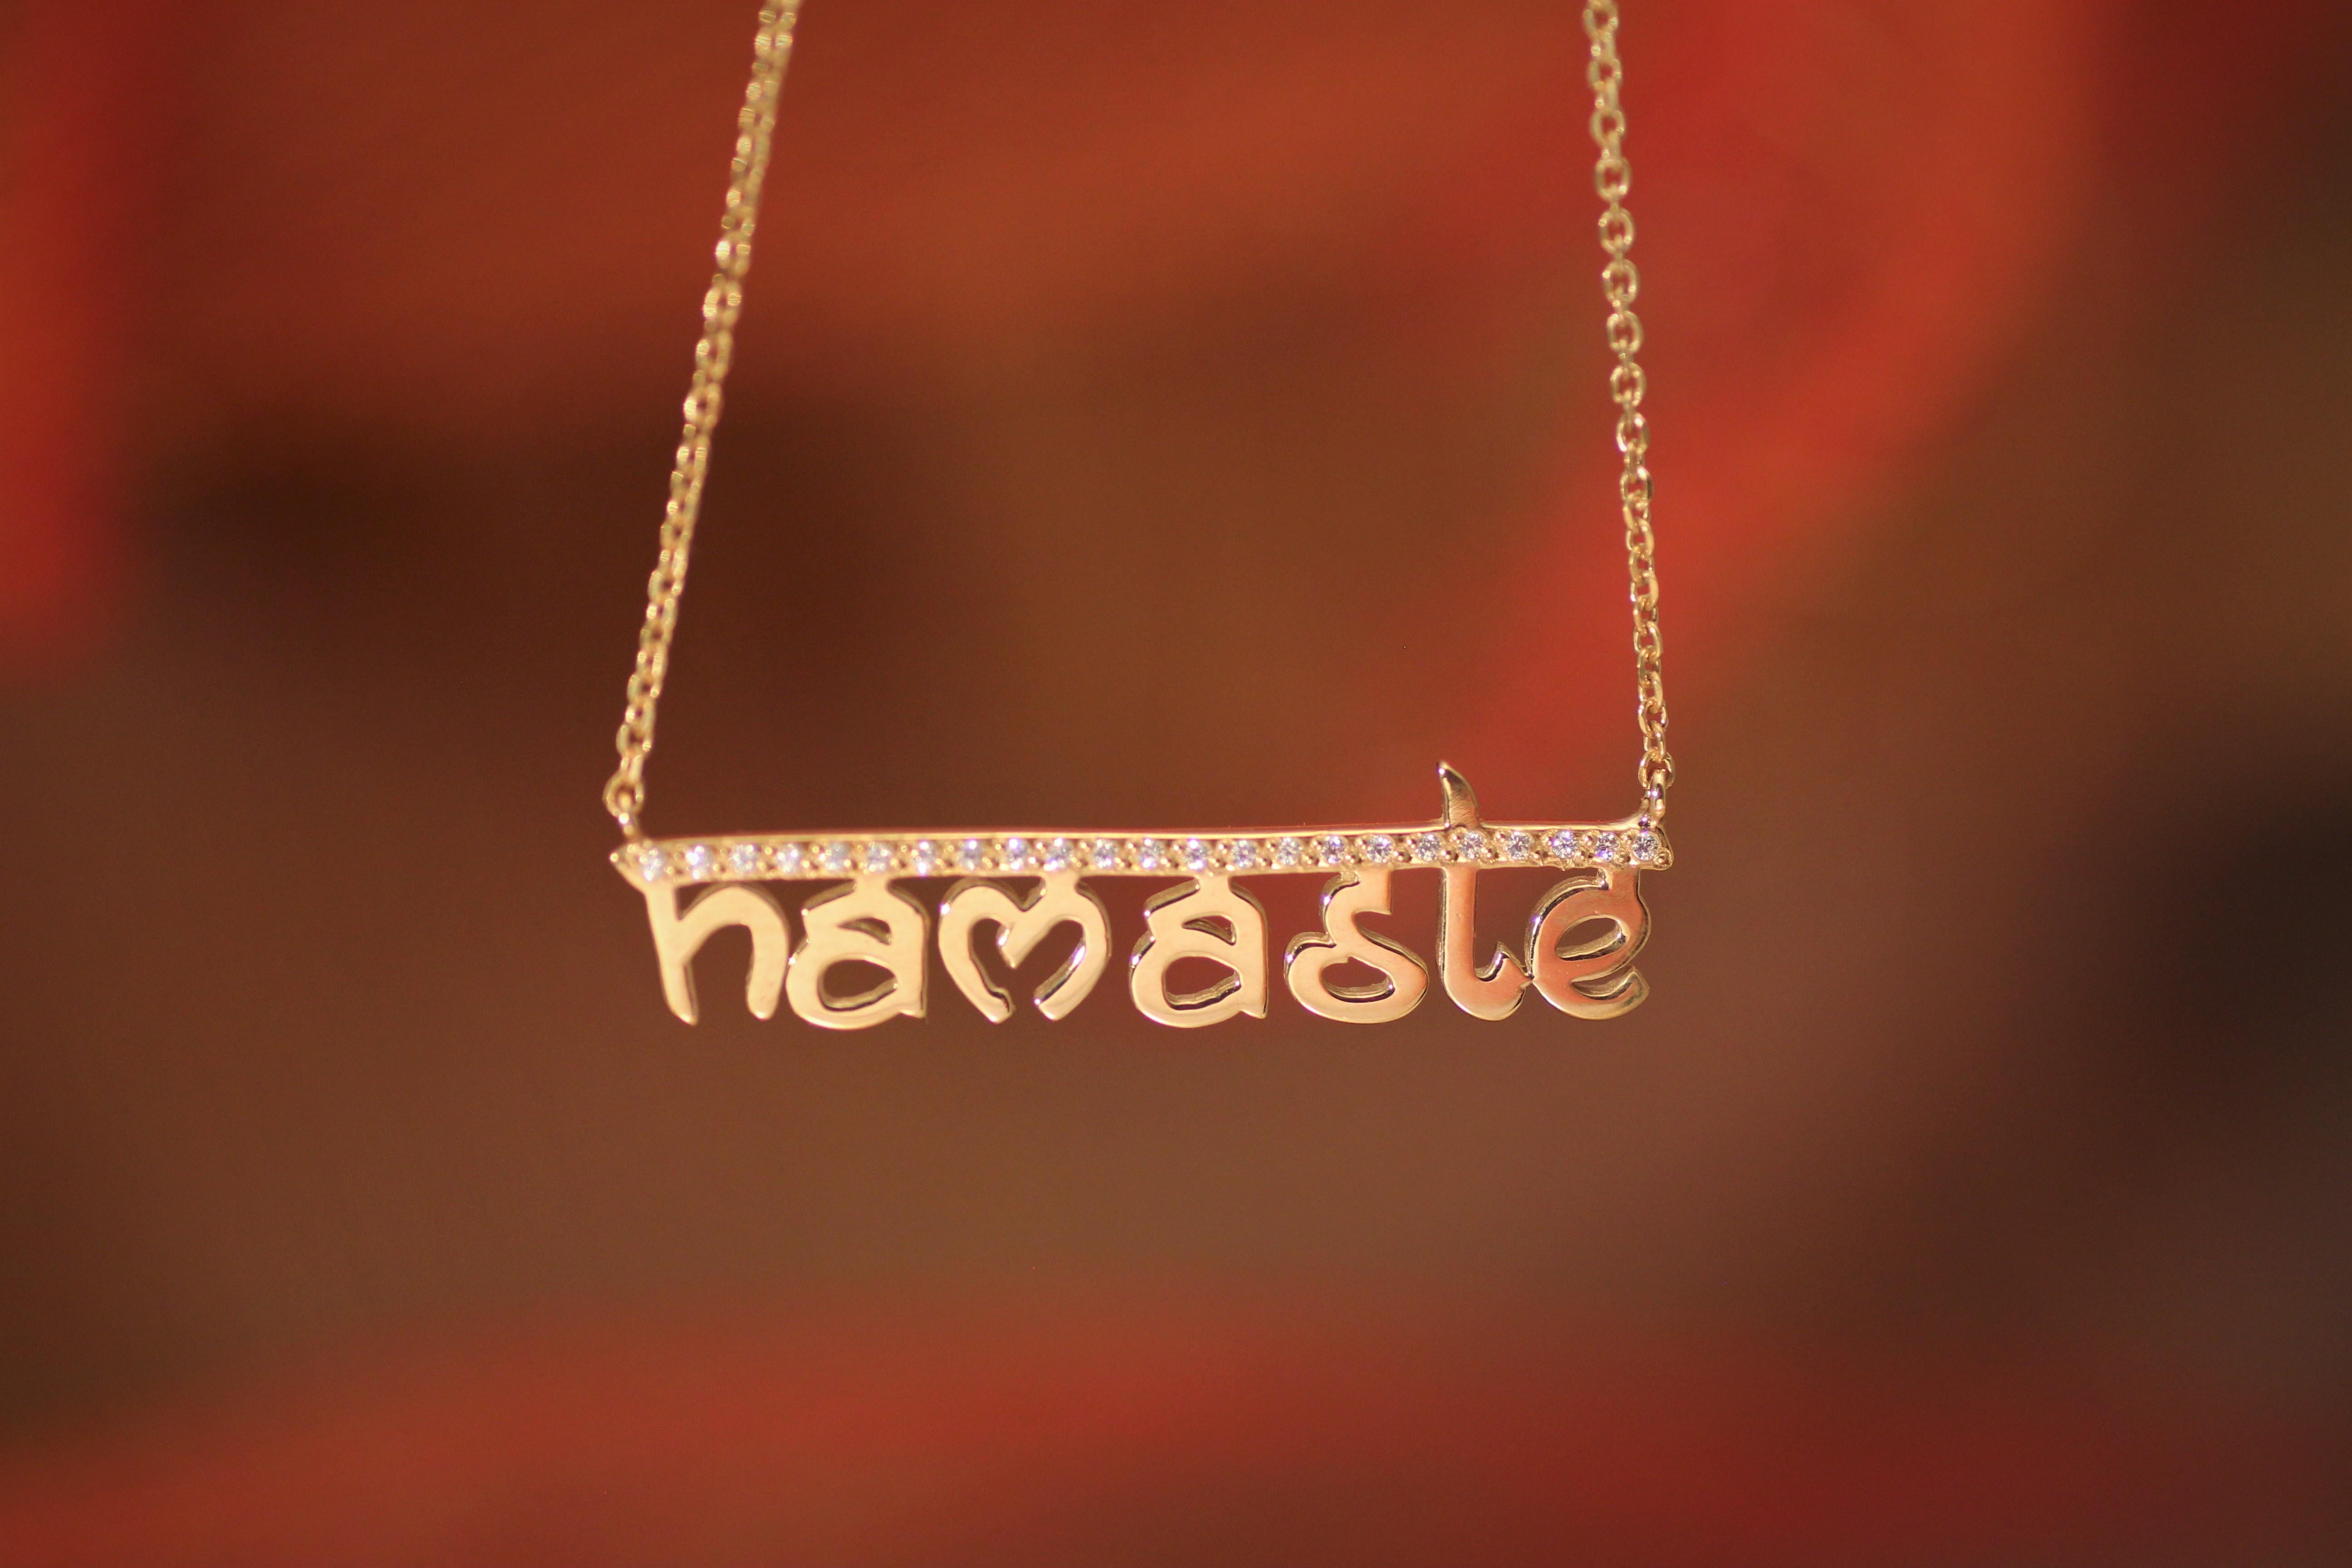 Pendant Necklace with brilliant cut diamonds inspired by Yoga ''Namaste'', handcrafted in 14Kt Gold.
Namaste is devout greeting with a wonderful content. By saying this word, you greet that place in your body, where the universe lives. This unique